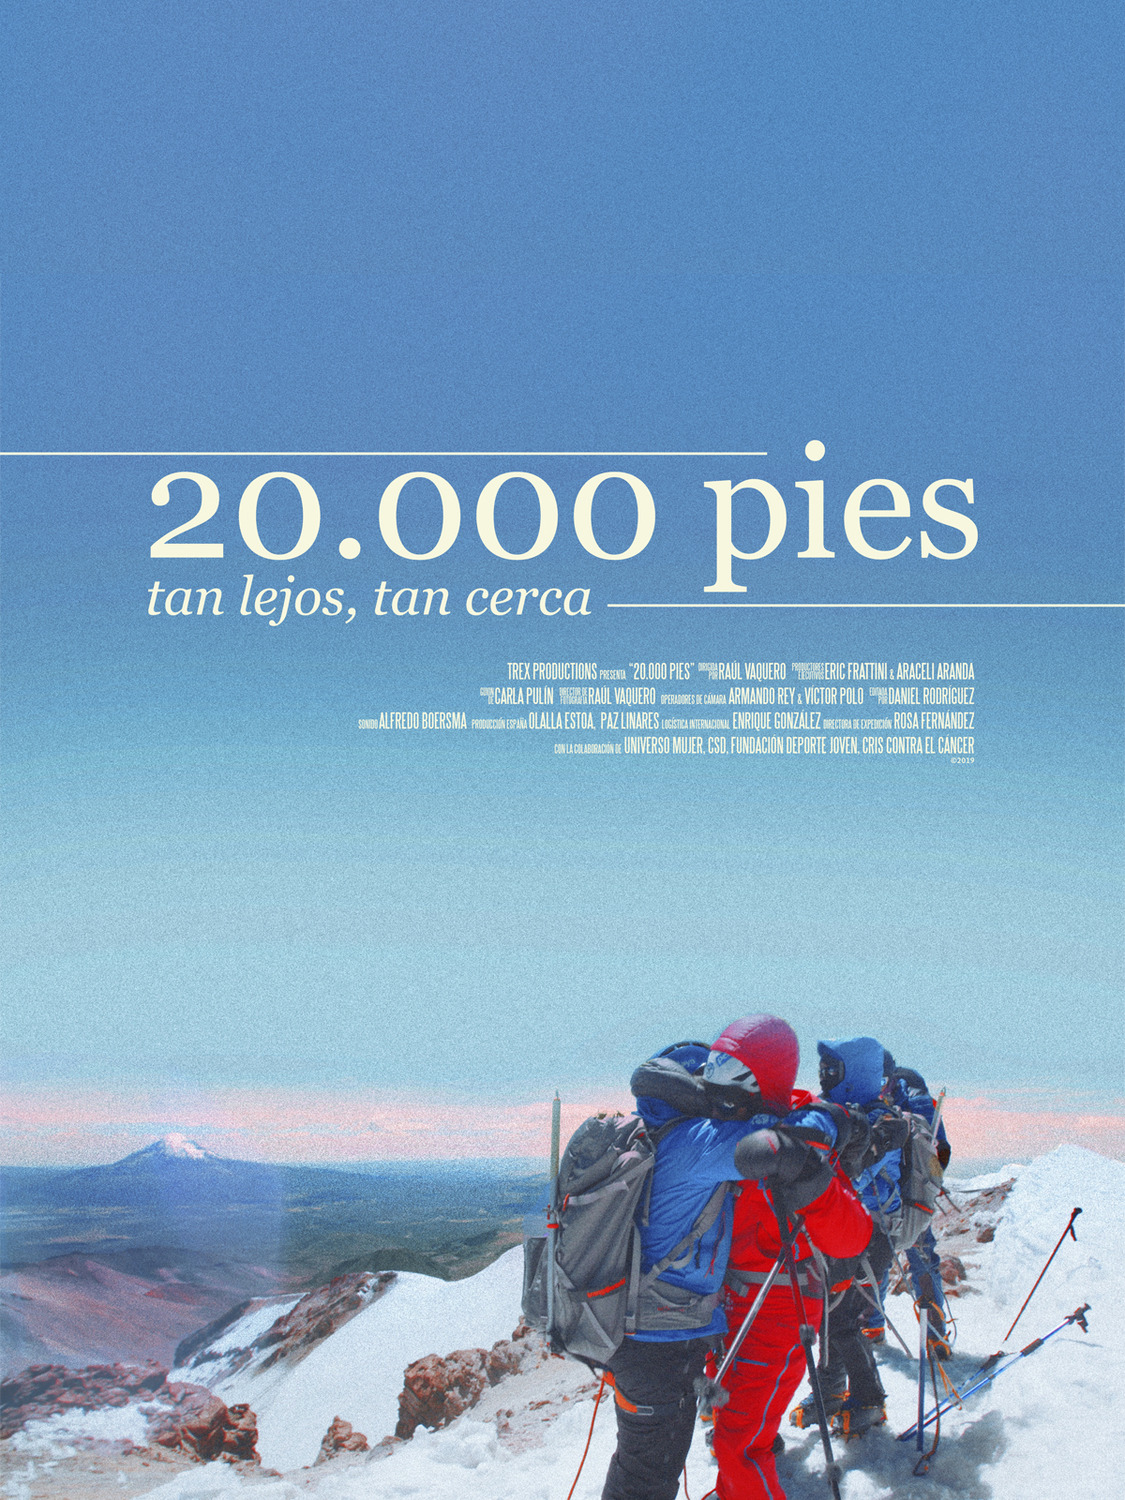 Extra Large Movie Poster Image for 20.000 pies. Tan cerca, tan lejos 